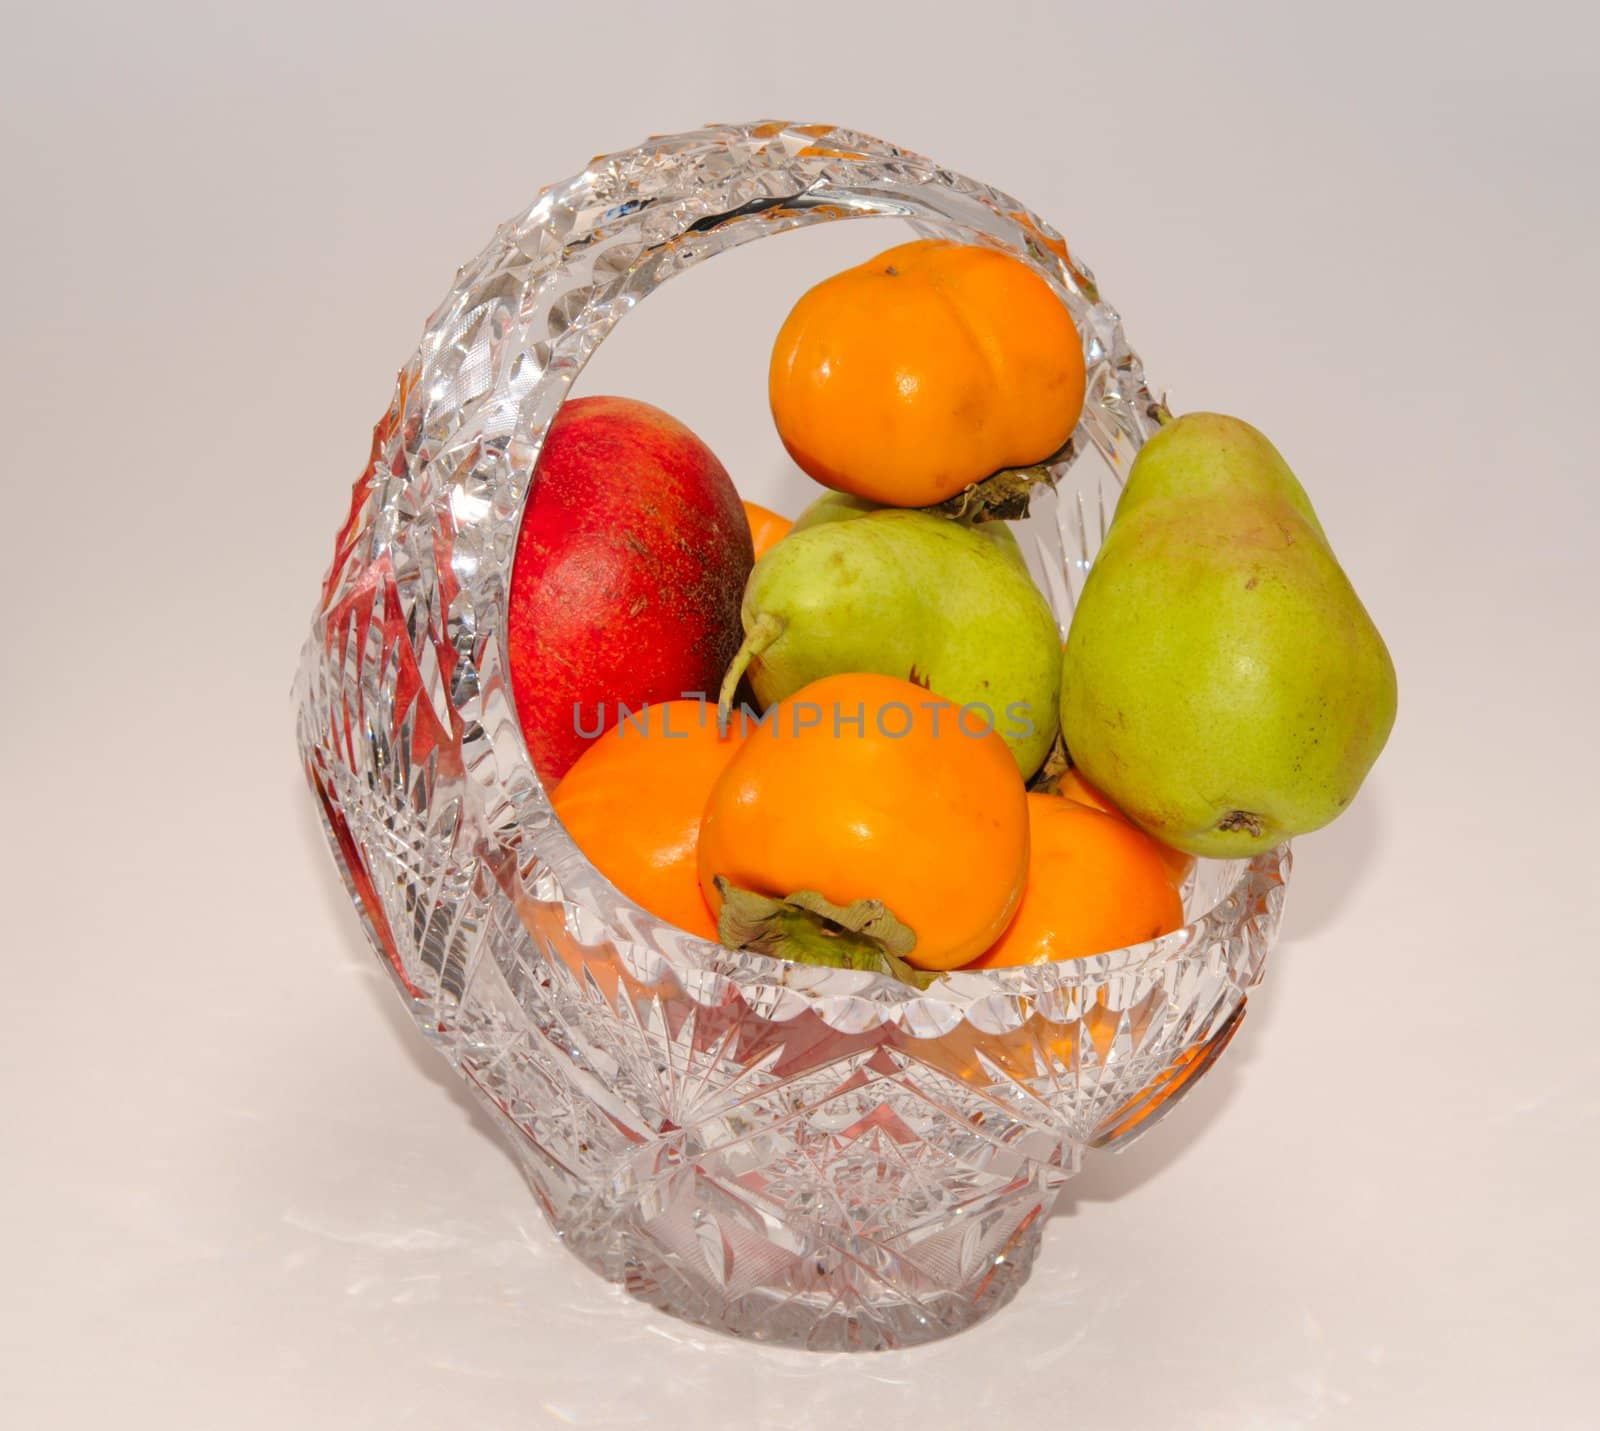 Pears, Persimmons And Pomegranate In Transparent Crystal Bowl.